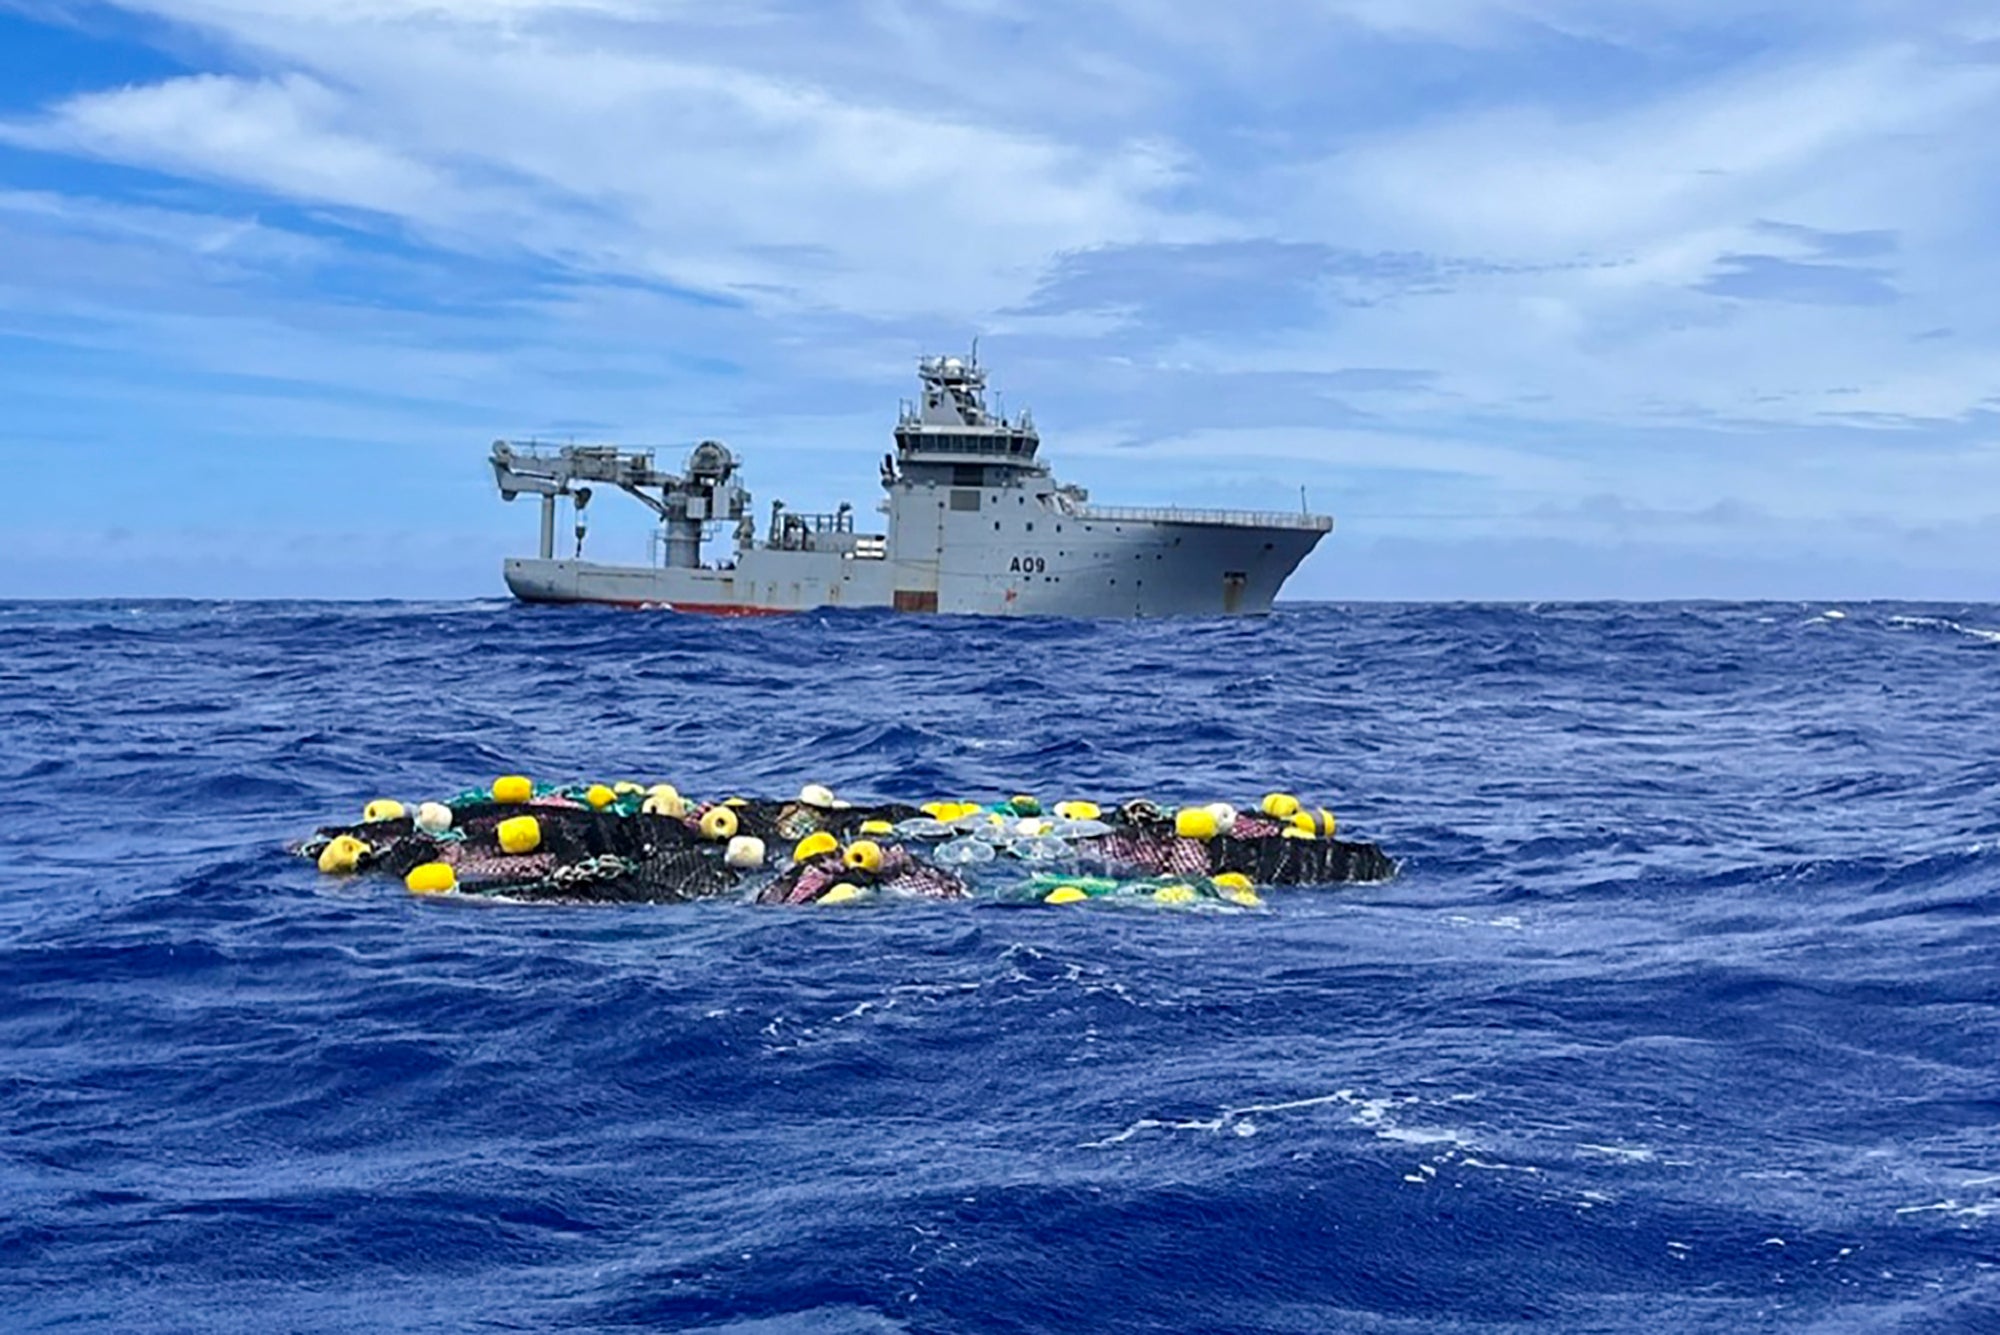 The shipment of cocaine floats on the surface of the Pacific Ocean with the Royal New Zealand Navy vessel HMNZS Manawanui behind